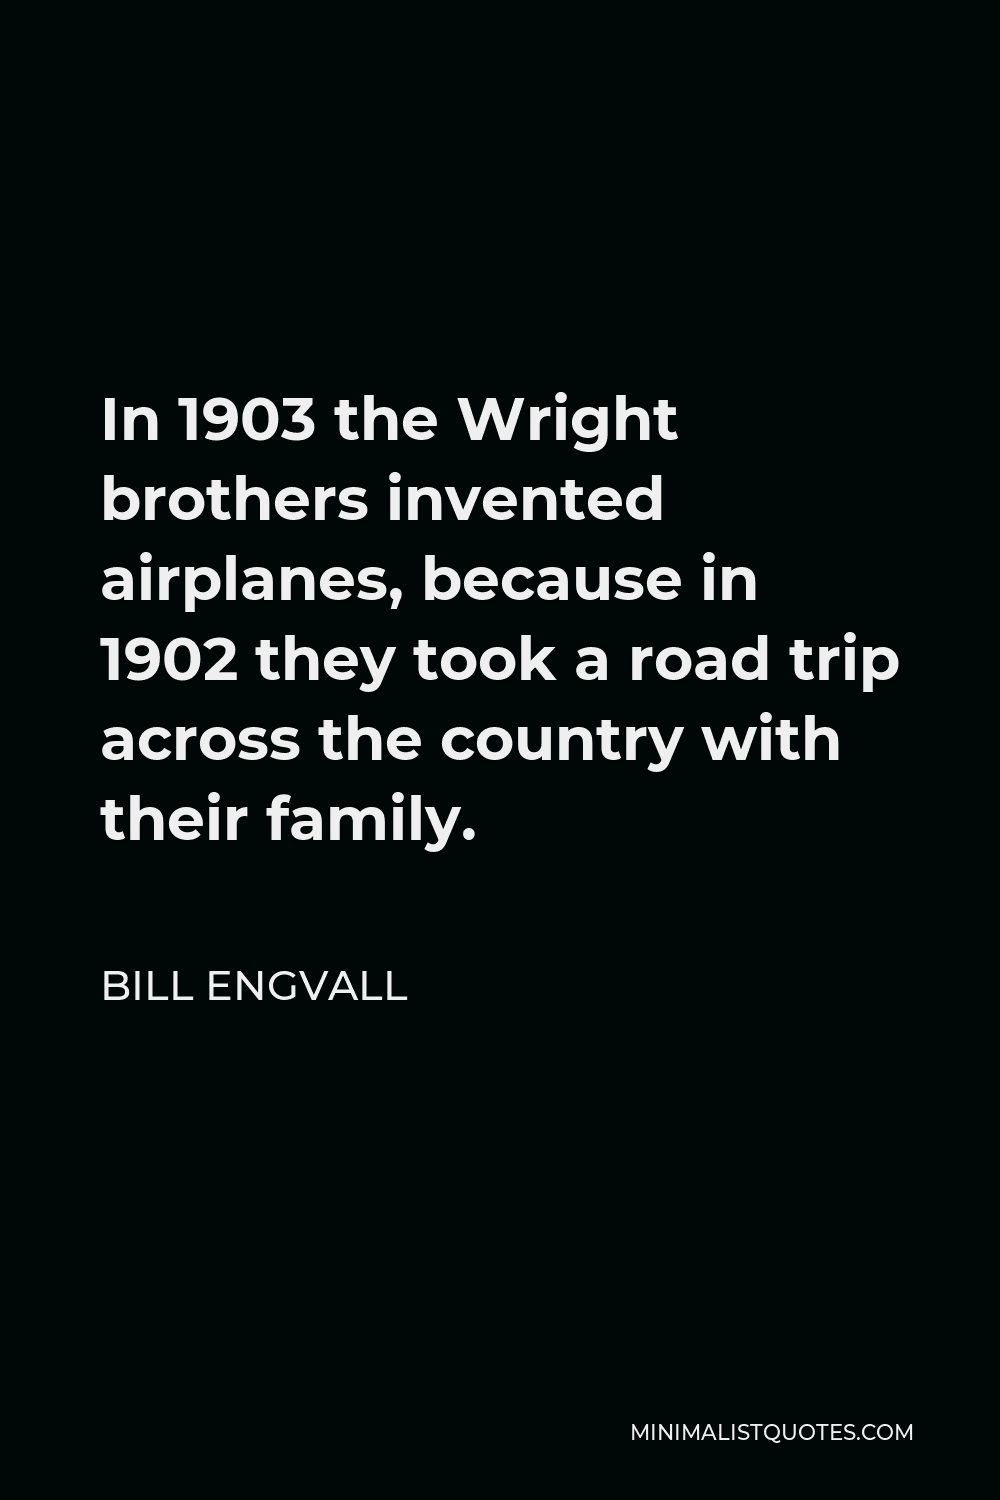 Bill Engvall Quote - In 1903 the Wright brothers invented airplanes, because in 1902 they took a road trip across the country with their family.